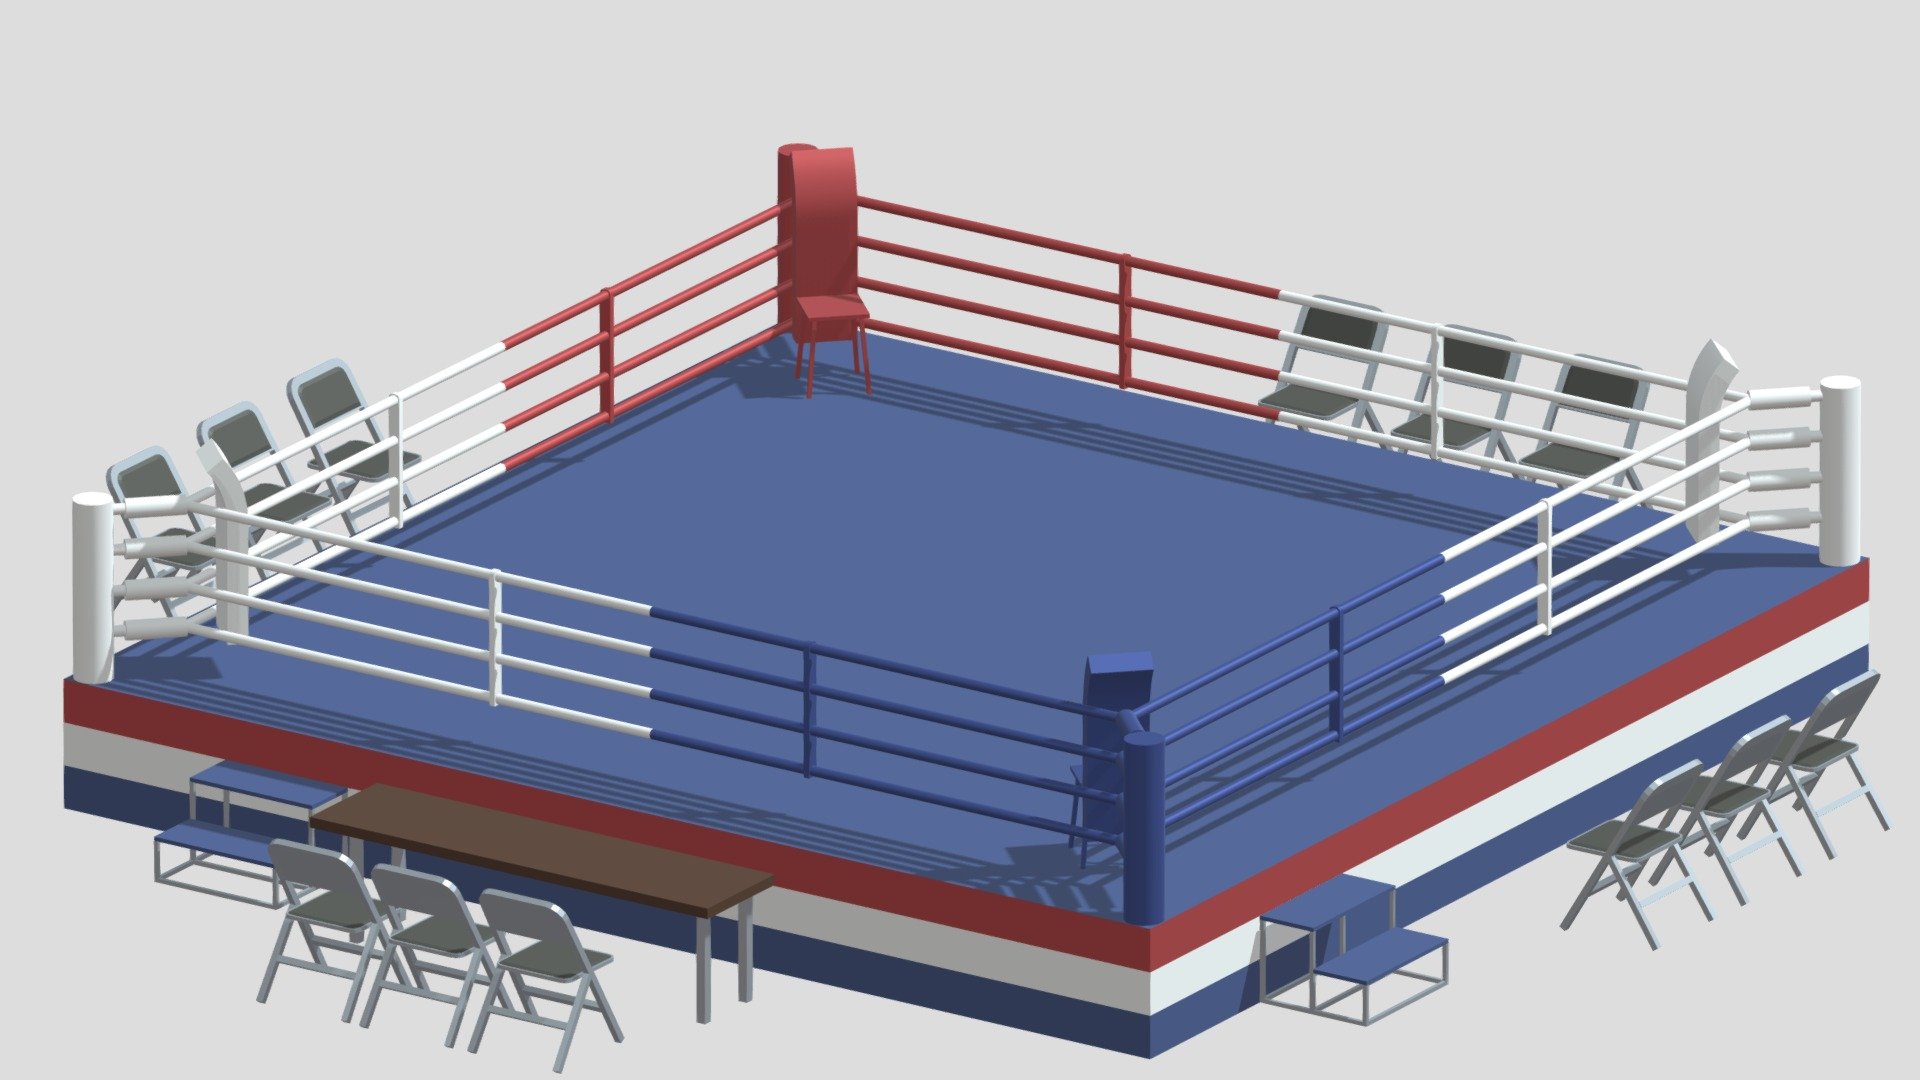 -Low Poly Cartoon Boxing Ring.

-This product contains 21 models.

-This product was created in Blender 2.8.

-Total vertices: 1,660. Total polygons: 1,523;

-Formats: . blend . fbx . obj, c4d,dae,fbx,unity.

-We hope you enjoy this model.

-Thank you 3d model